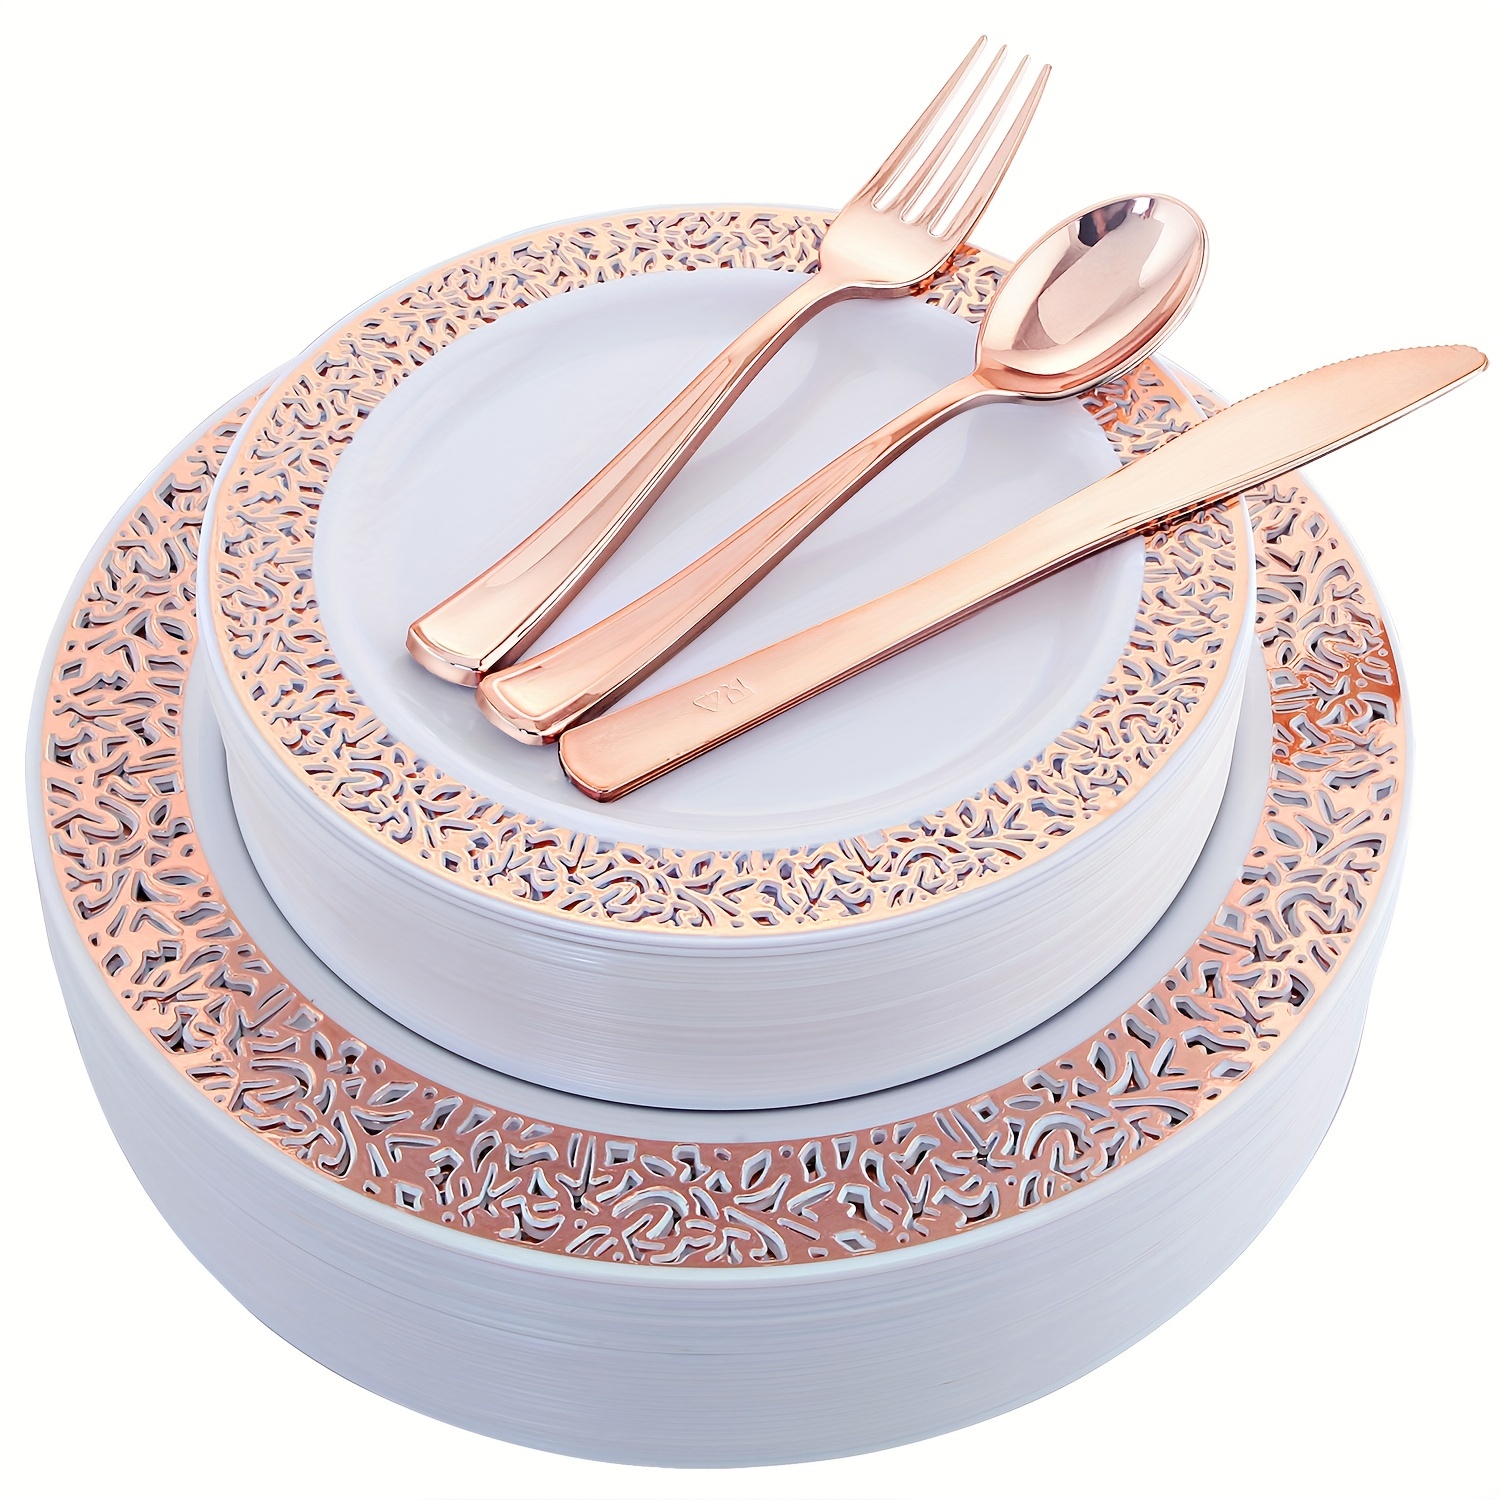 100PCS Rose Golden Plastic Plates with Disposable Silverware Set at Low Price